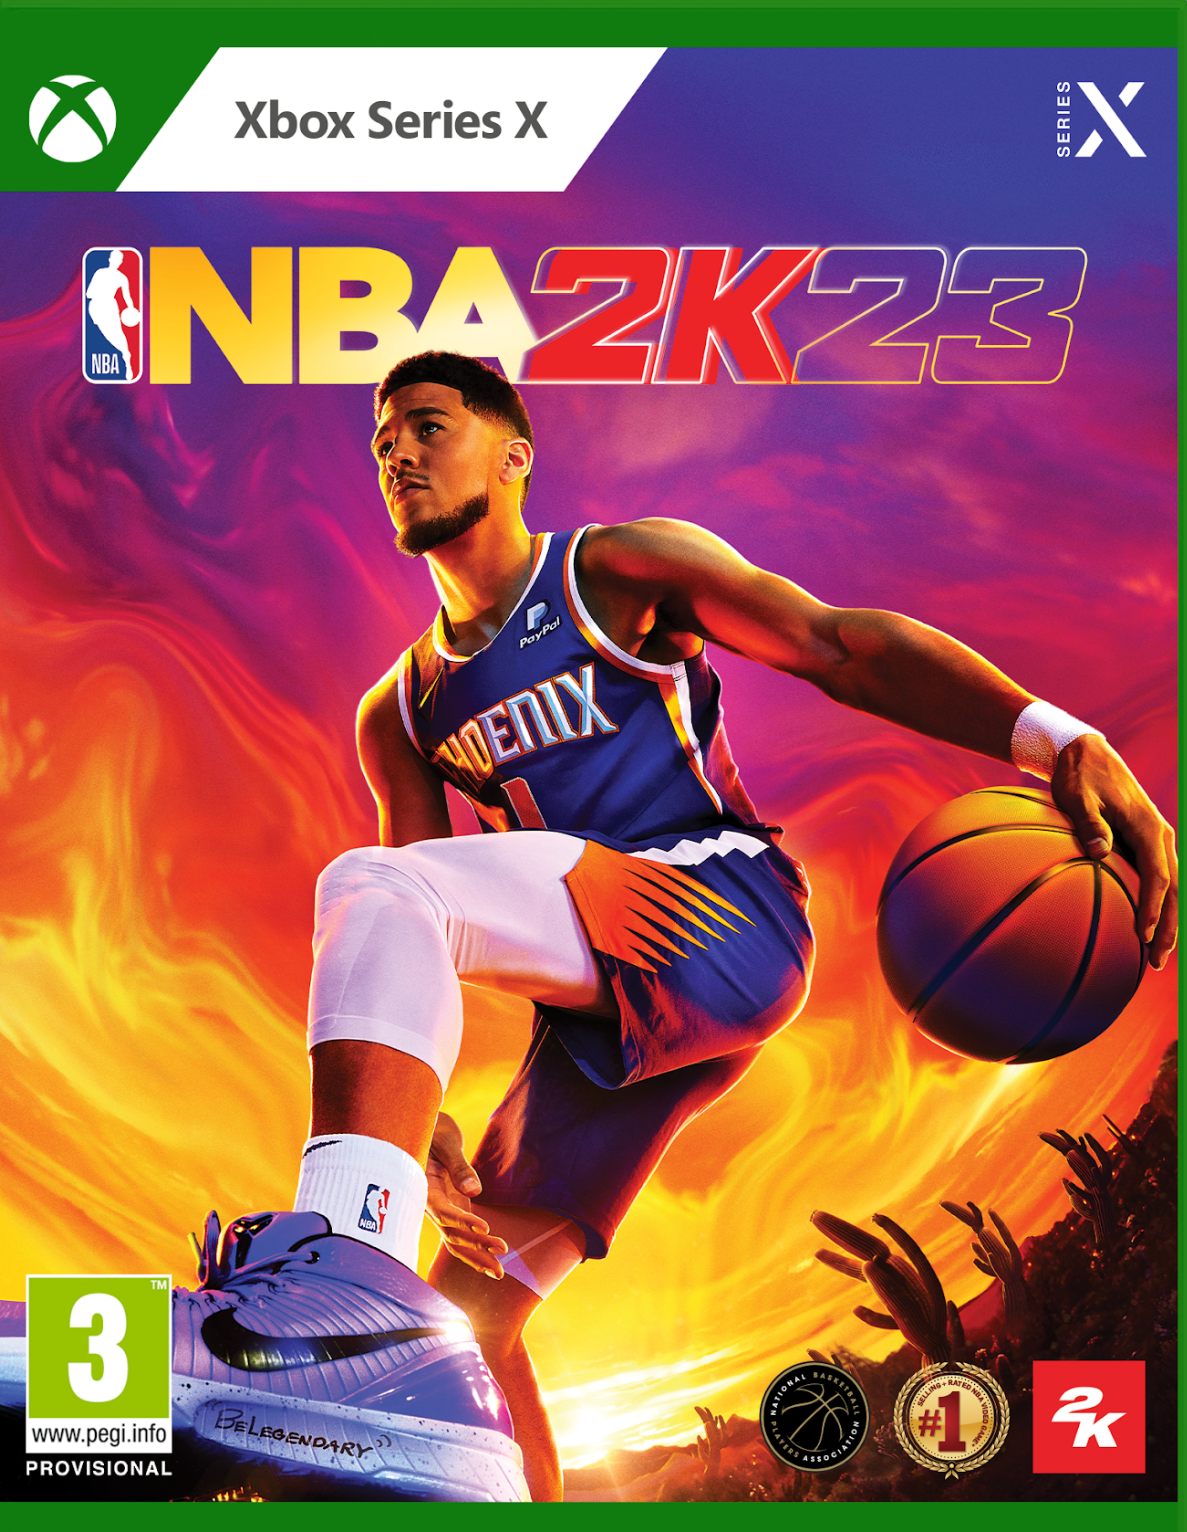 How to pre-order NBA2K23: retailers, editions, and bonuses